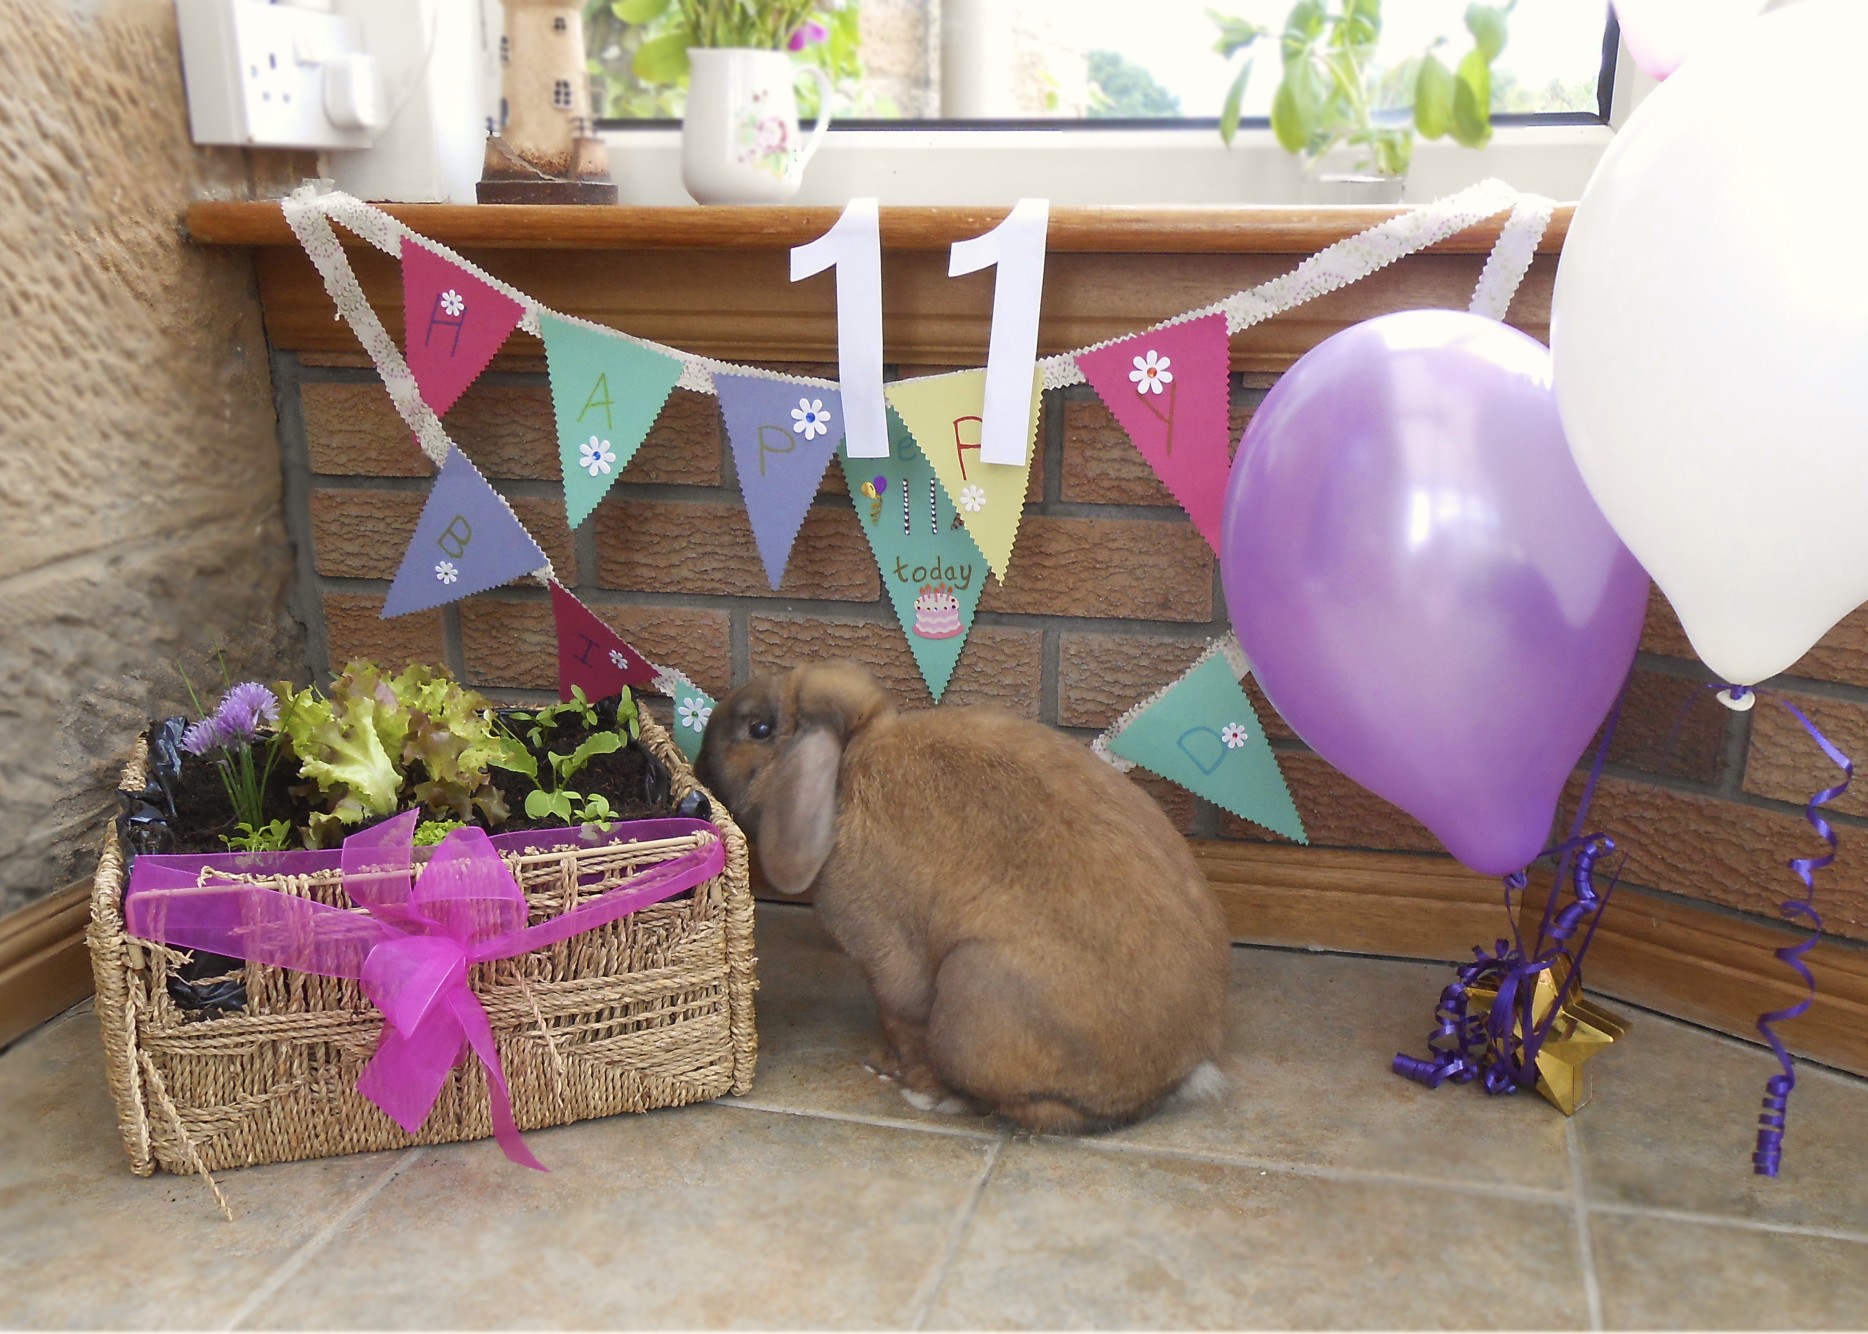 Bunny Celebrates His Eleventh Birthday with a Garden Planted in His Favorite Chewable Basket